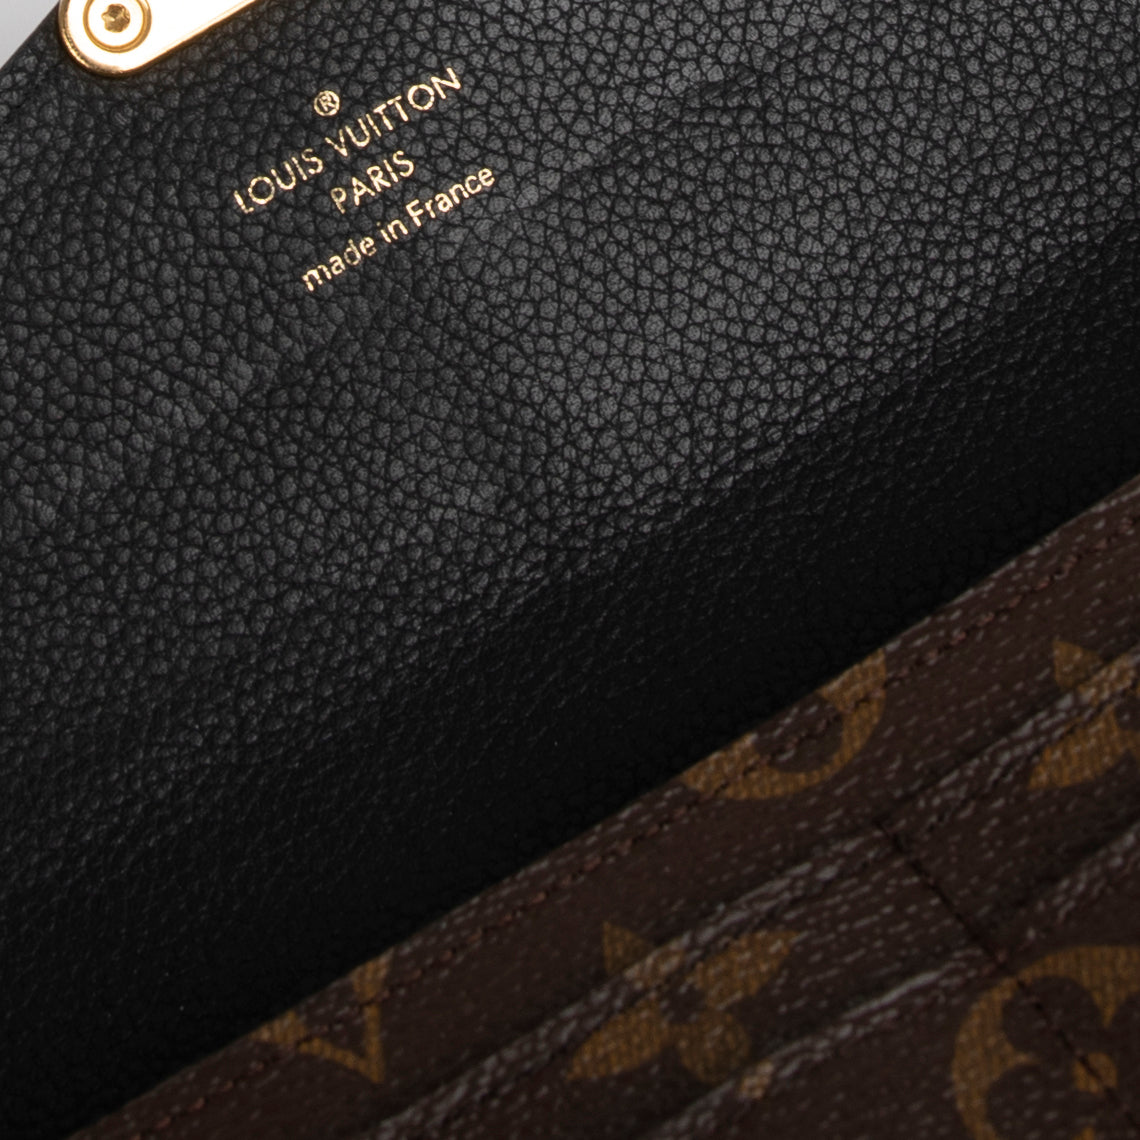 Our Louis Vuitton Monogram Pallas Wallet w/ Box Louis Vuitton line is  priced at a reasonable price